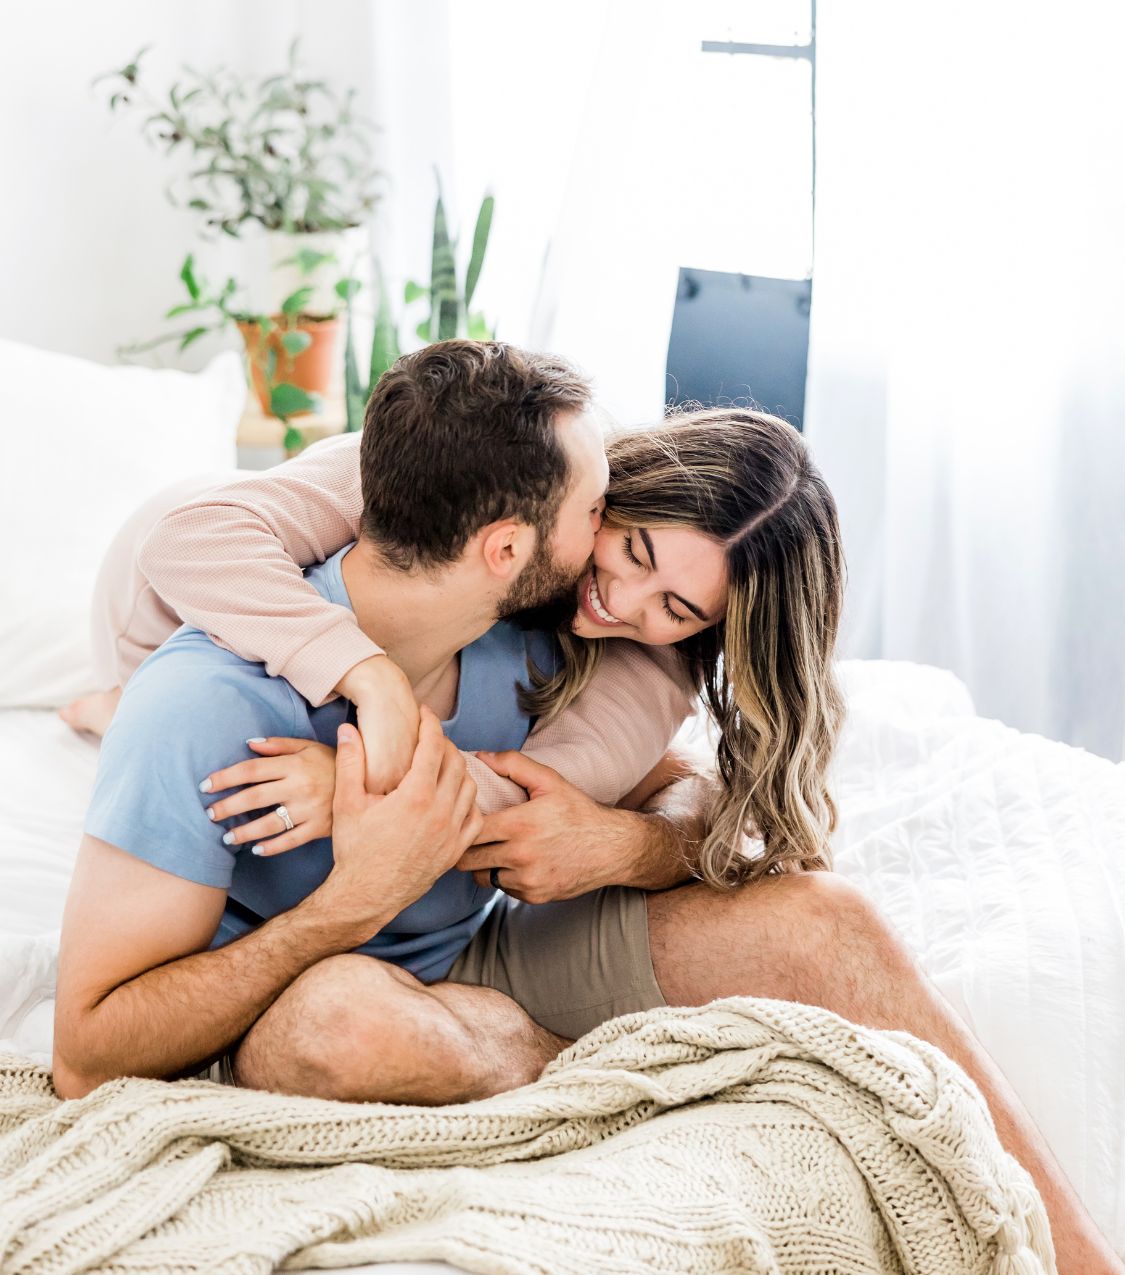 Image of a woman hugging the back of her husband while he kisses her cheek and she smiles. Do you struggle with intimacy issues? Learn tips from a skilled couples therapist on how you can overcome your issues. Find support with couples therapy in Miami, FL.